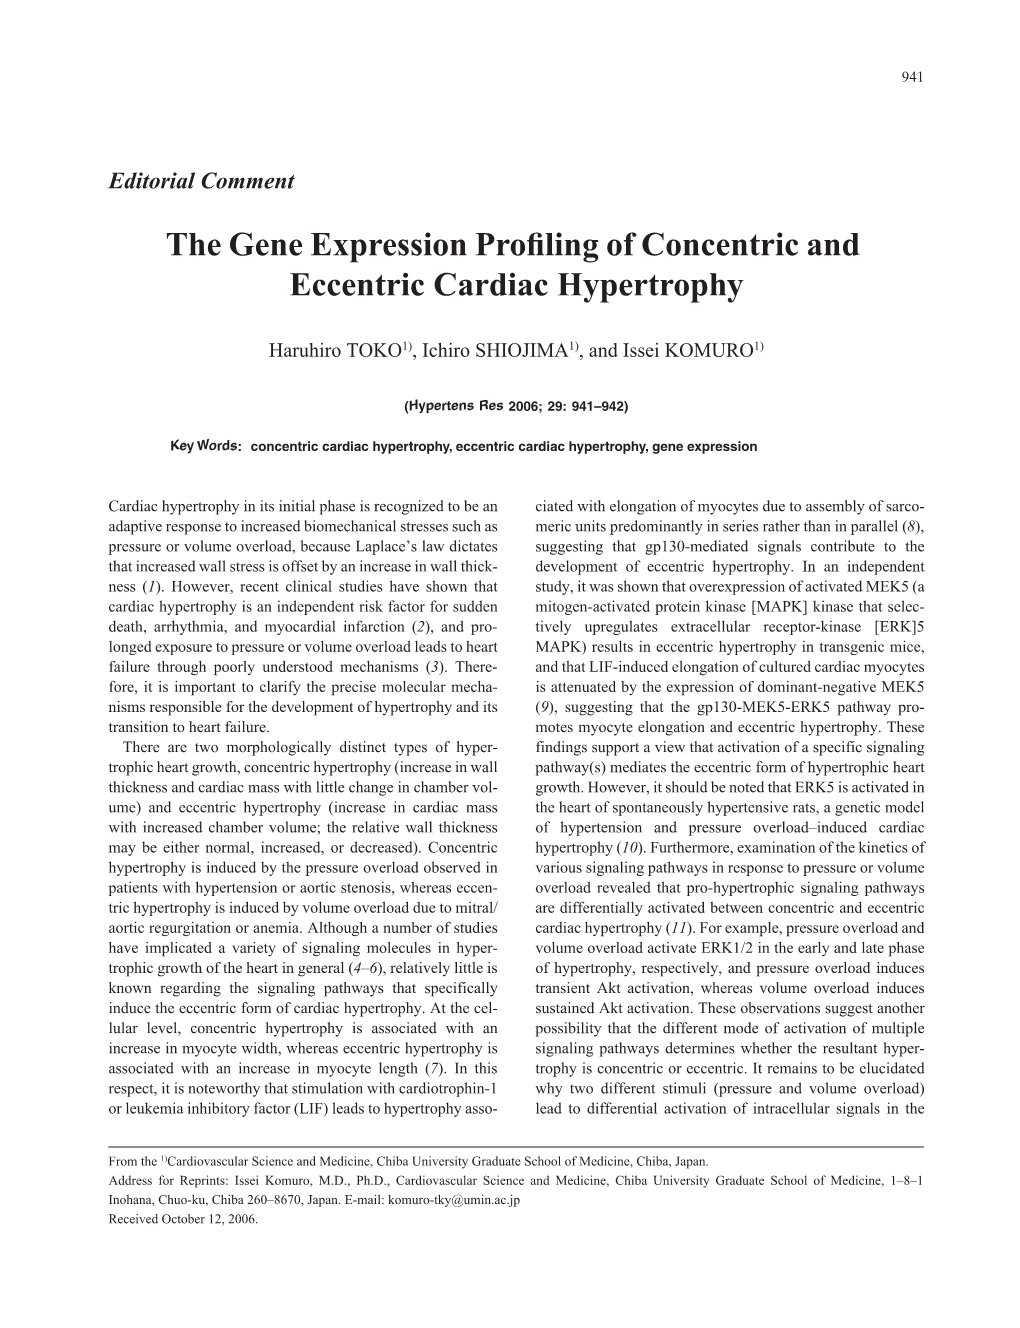 The Gene Expression Profiling of Concentric and Eccentric Cardiac Hypertrophy